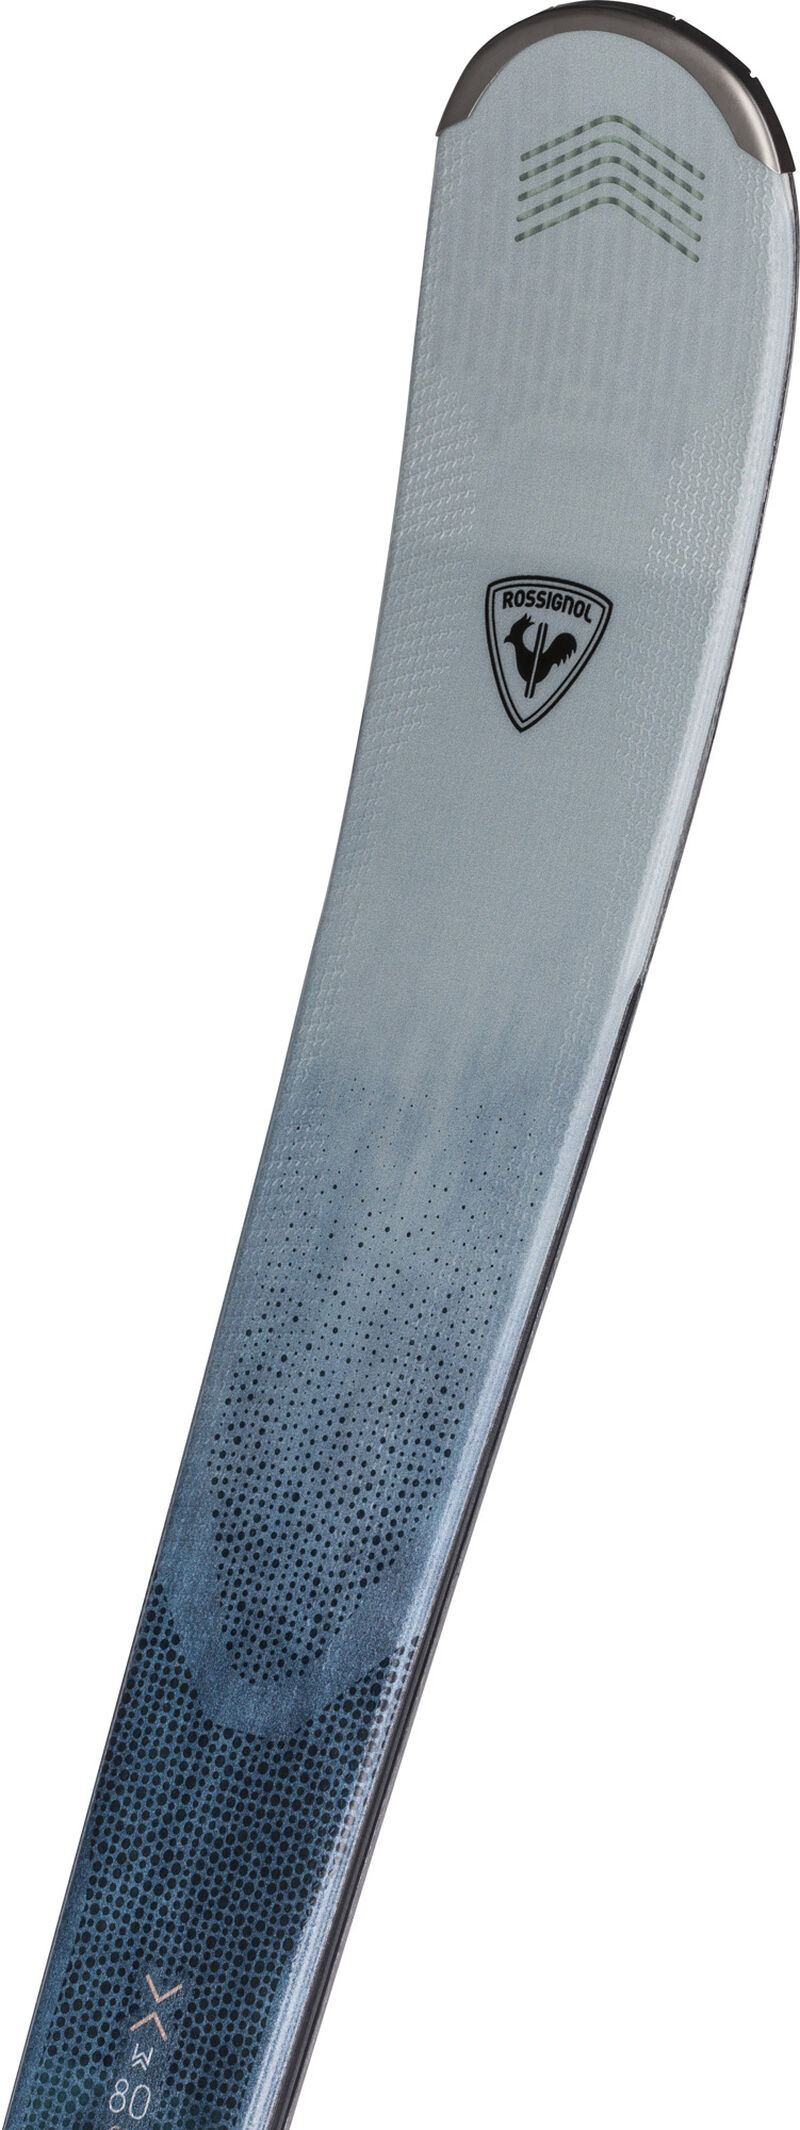 Skis All Mountain femme EXPERIENCE W 80 CARBON (XPRESS)